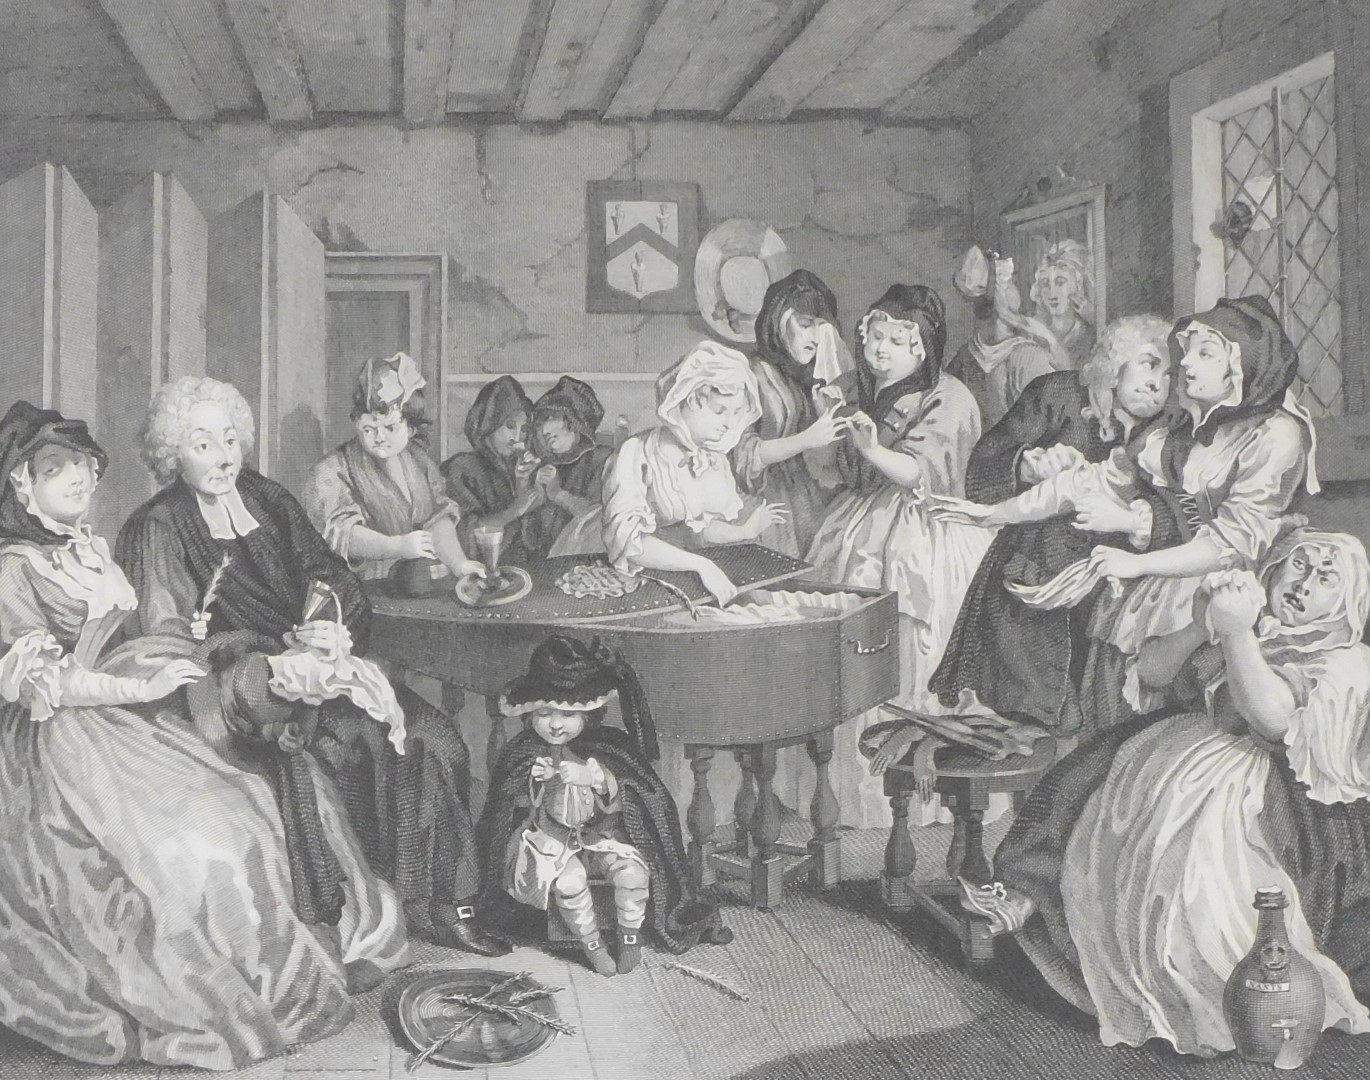 After William Hogarth (English, 1697-1764) A Harlots Progress, engravings, plates one to six, publis - Image 2 of 7